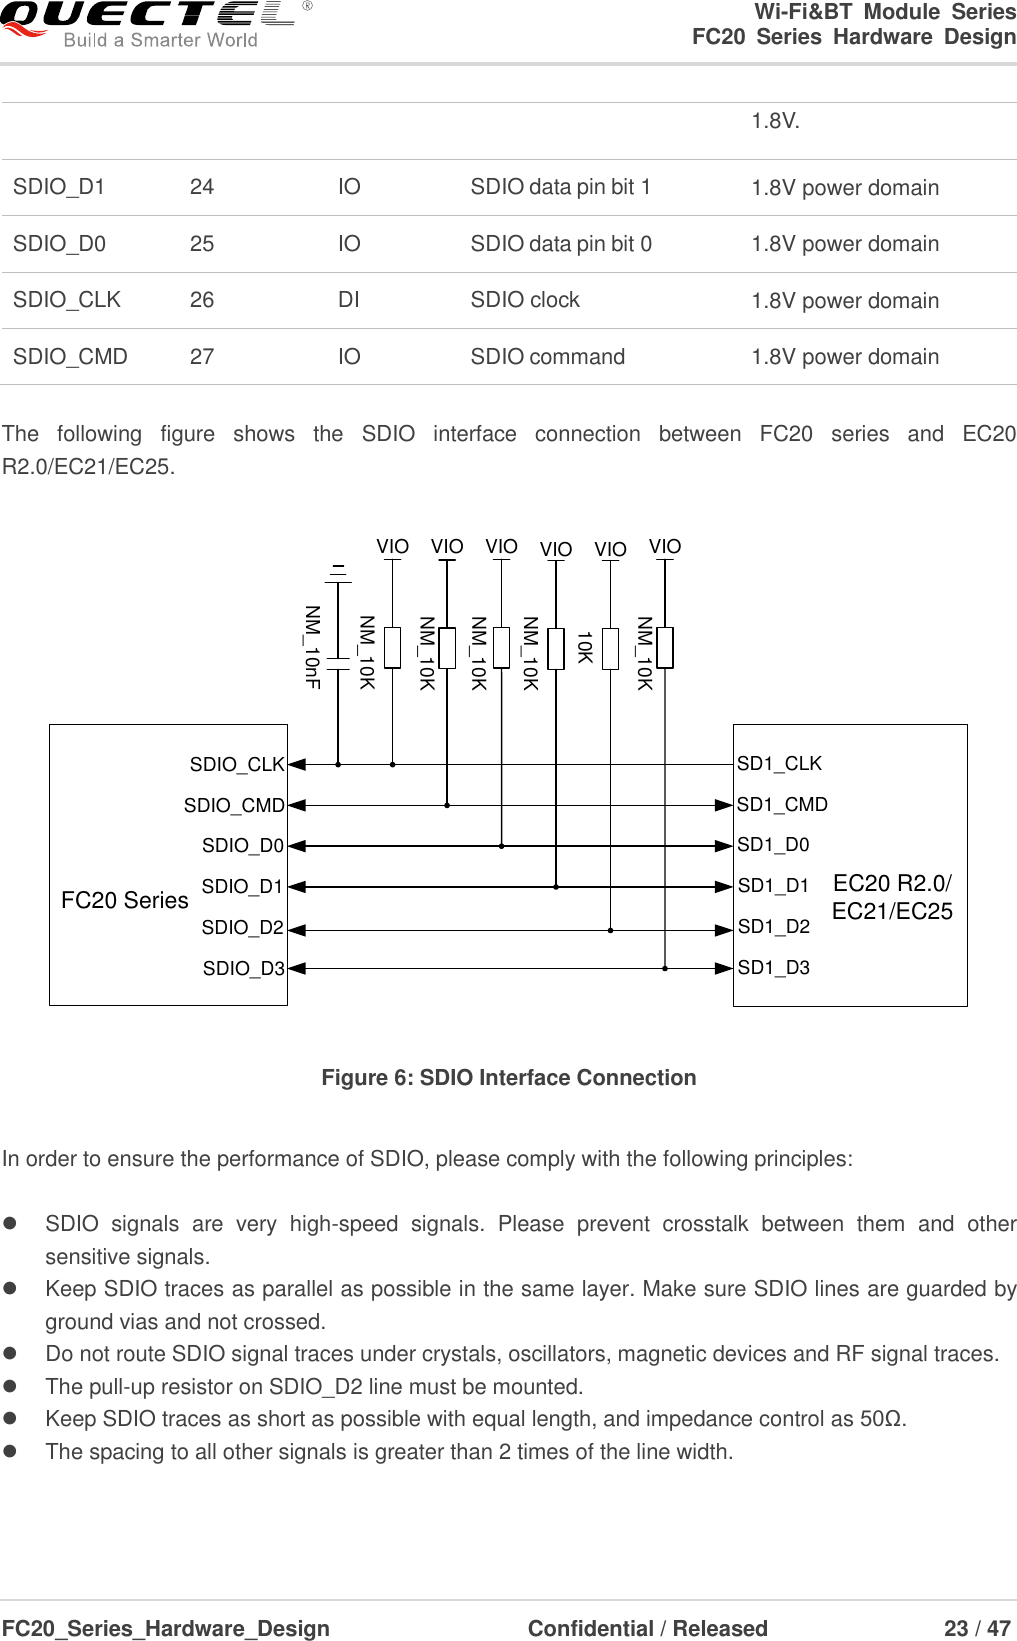                                                                        Wi-Fi&amp;BT  Module  Series                                                               FC20  Series  Hardware  Design  FC20_Series_Hardware_Design                                    Confidential / Released                    23 / 47    1.8V. SDIO_D1 24 IO SDIO data pin bit 1 1.8V power domain SDIO_D0 25 IO SDIO data pin bit 0 1.8V power domain SDIO_CLK 26 DI SDIO clock 1.8V power domain SDIO_CMD 27 IO SDIO command 1.8V power domain  The  following  figure  shows  the  SDIO  interface  connection  between  FC20  series  and  EC20 R2.0/EC21/EC25. SDIO_CLKSDIO_CMDSDIO_D0SDIO_D1SDIO_D2SDIO_D3EC20 R2.0/EC21/EC25FC20 SeriesSD1_D0SD1_D1SD1_D2SD1_D3SD1_CLKSD1_CMD10KNM_10KVIO VIO VIO VIO VIO VIONM_10KNM_10KNM_10KNM_10KNM_10nF Figure 6: SDIO Interface Connection  In order to ensure the performance of SDIO, please comply with the following principles:    SDIO  signals  are  very  high-speed  signals.  Please  prevent  crosstalk  between  them  and  other sensitive signals.   Keep SDIO traces as parallel as possible in the same layer. Make sure SDIO lines are guarded by ground vias and not crossed.   Do not route SDIO signal traces under crystals, oscillators, magnetic devices and RF signal traces.   The pull-up resistor on SDIO_D2 line must be mounted.   Keep SDIO traces as short as possible with equal length, and impedance control as 50Ω.   The spacing to all other signals is greater than 2 times of the line width.  